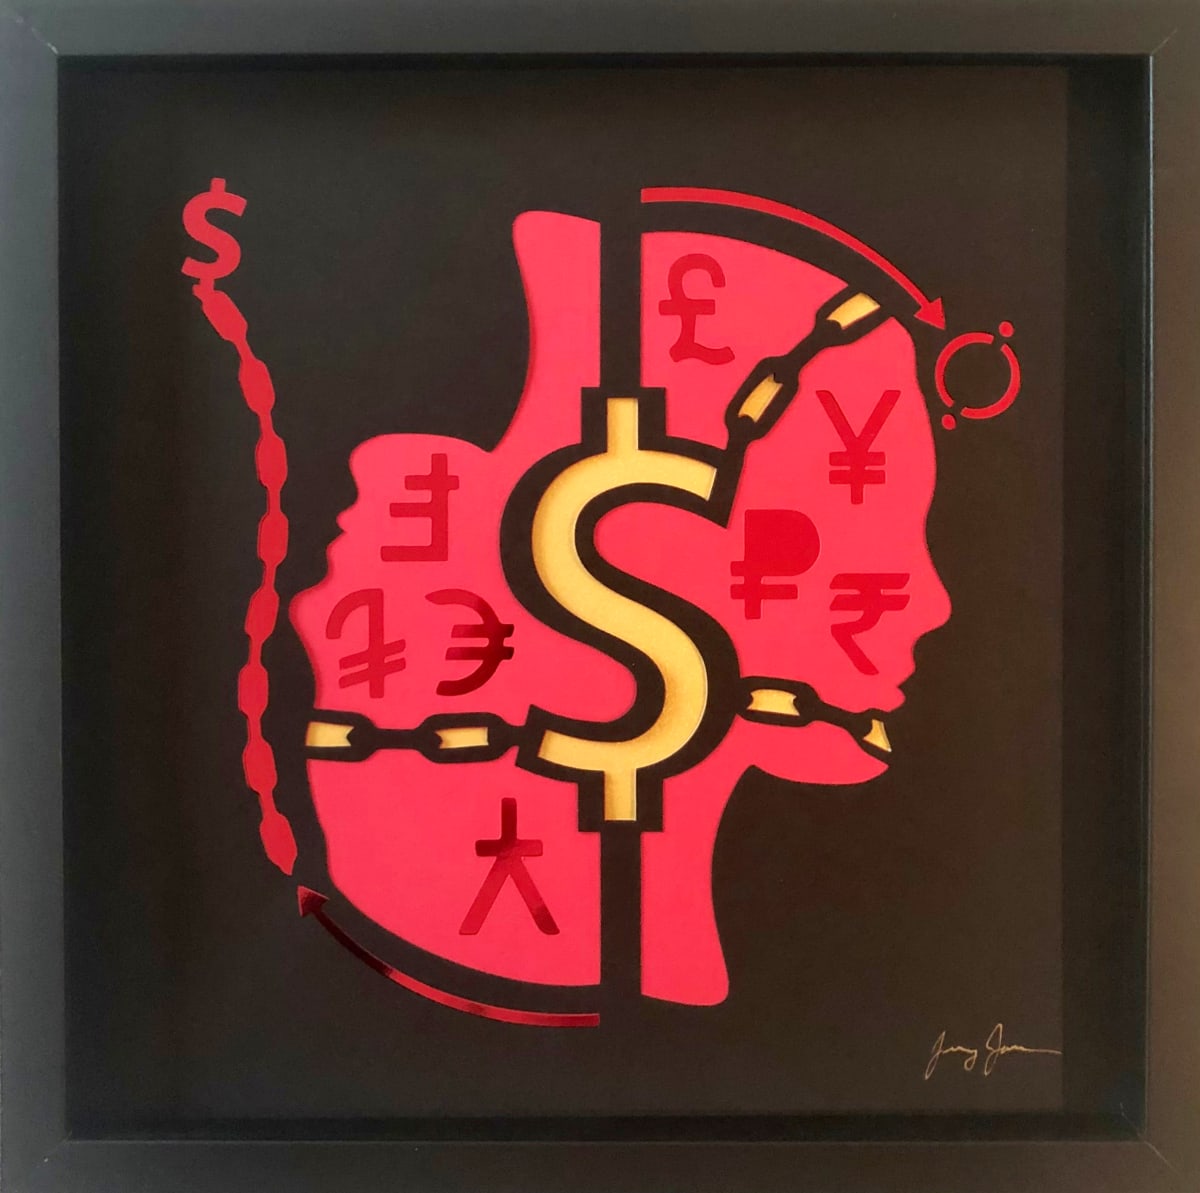 Profile 017 Currency Queen by Jessey Jansen  Image: Framed art